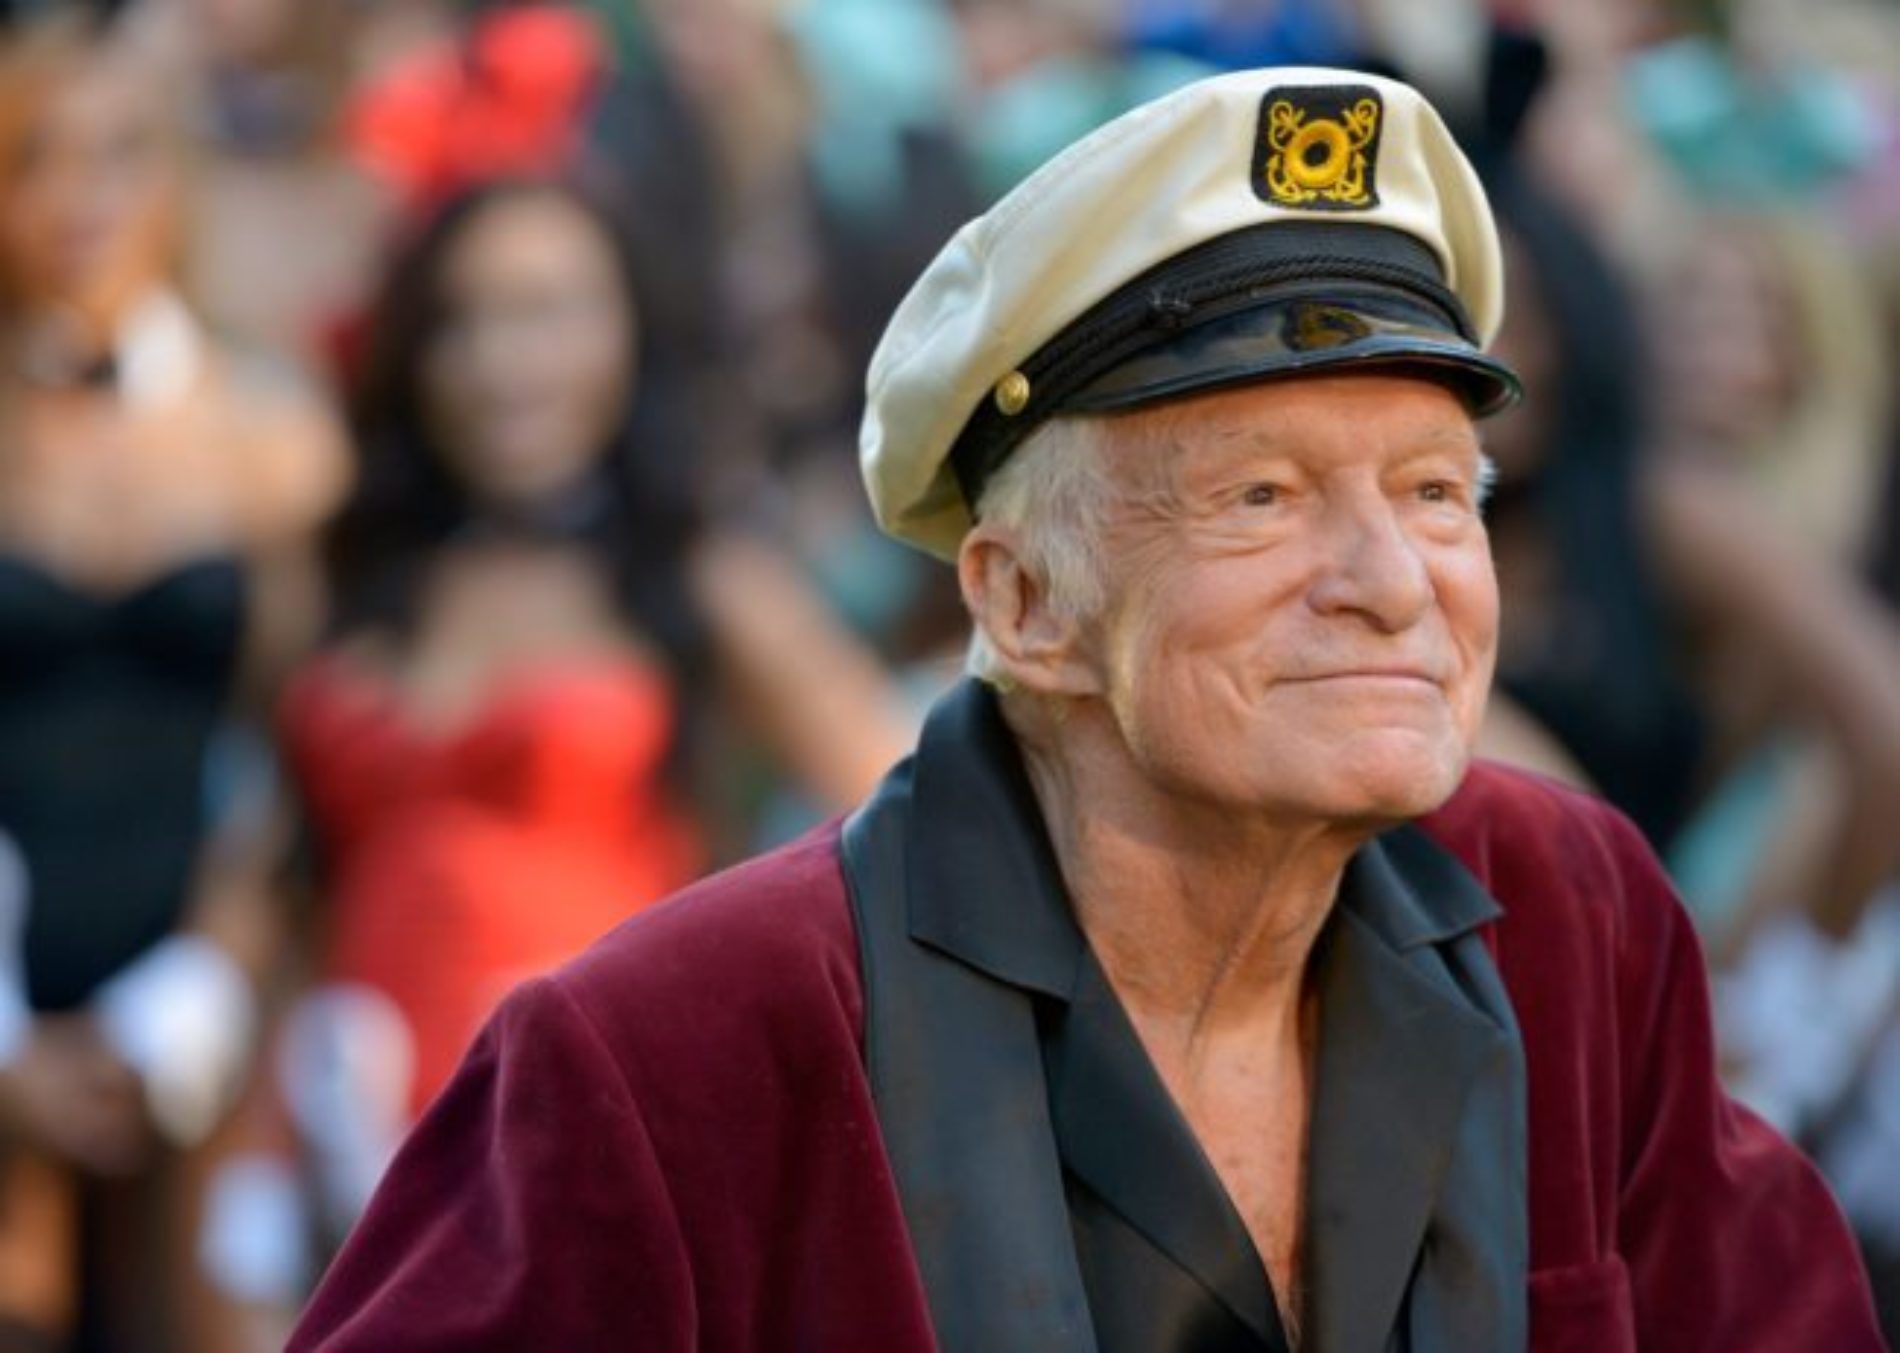 What Playboy founder Hugh Hefner thought about gay rights and AIDS